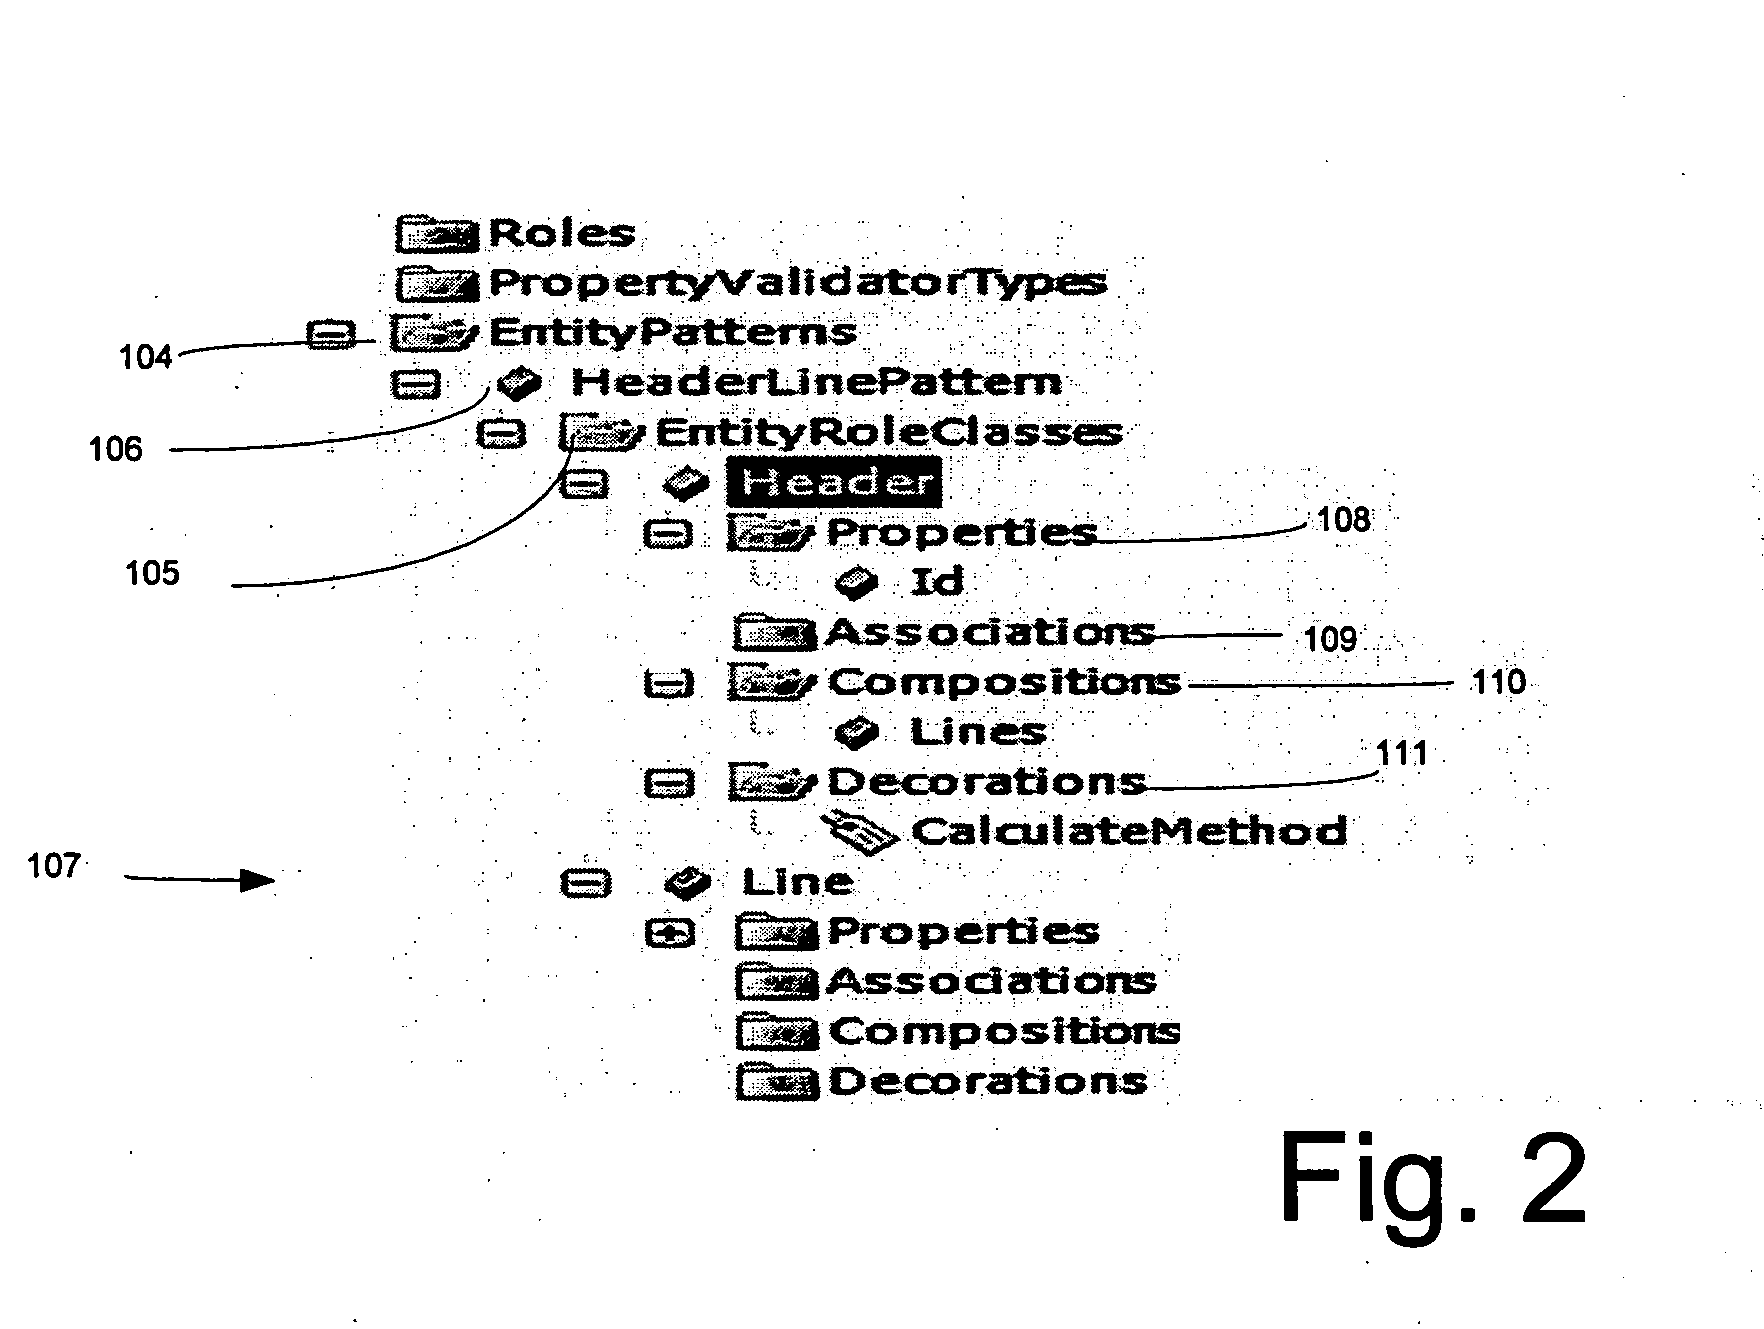 System and methods for capturing structure of data models using entity patterns